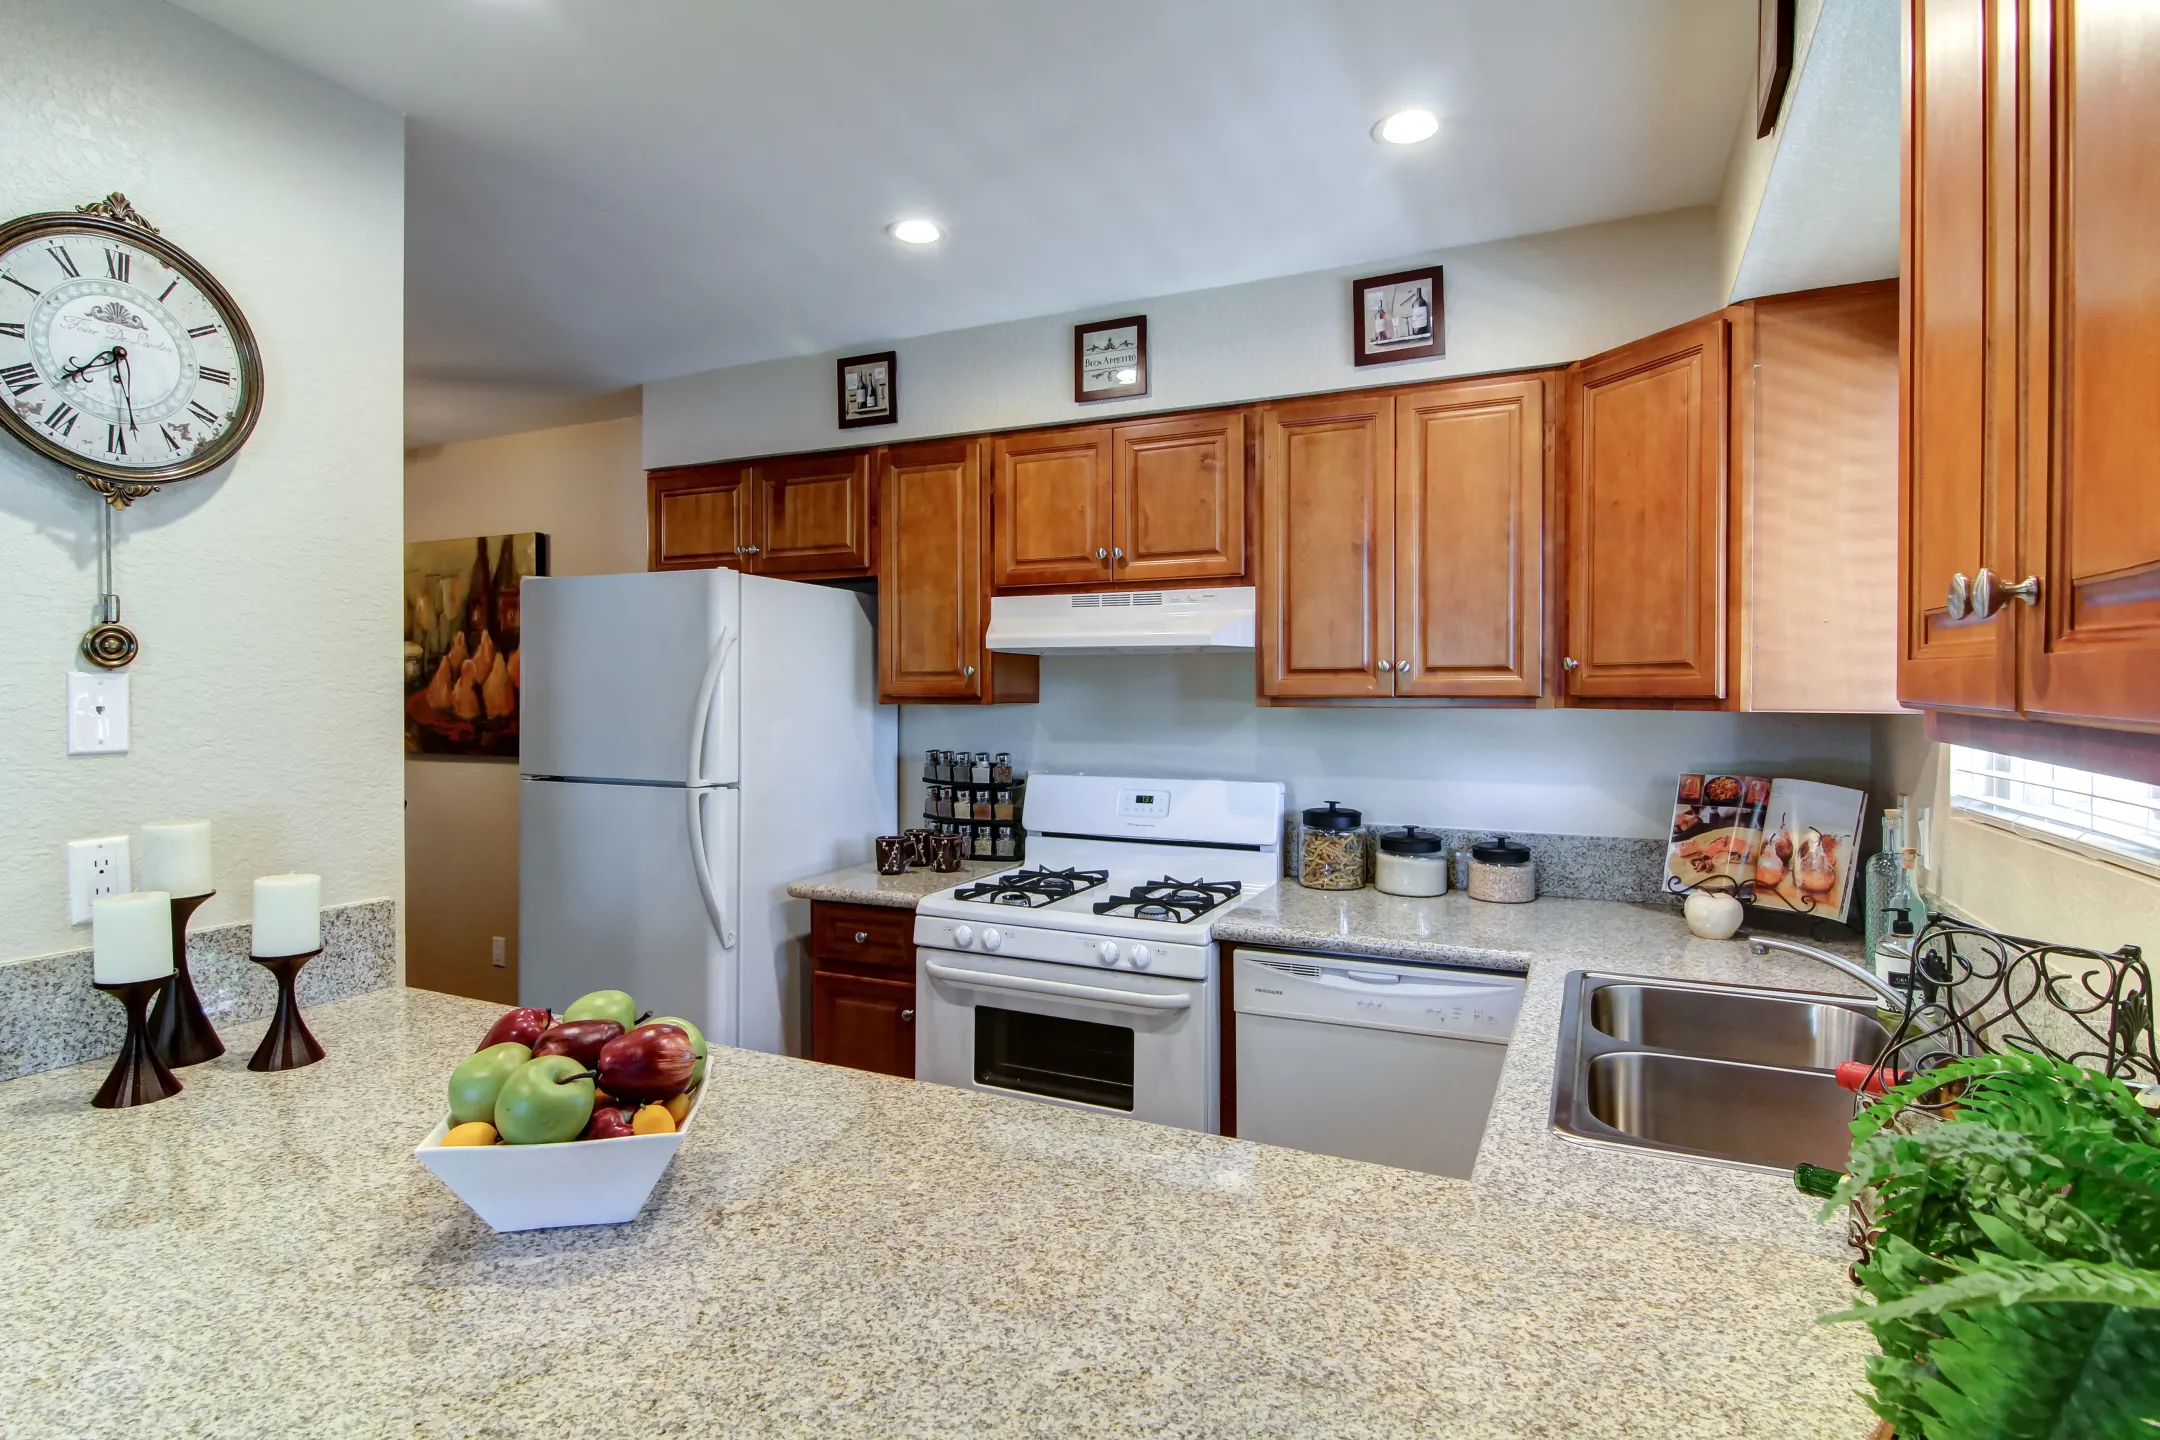 Kitchen - Sycamore Terrace Apartments - Temecula, CA